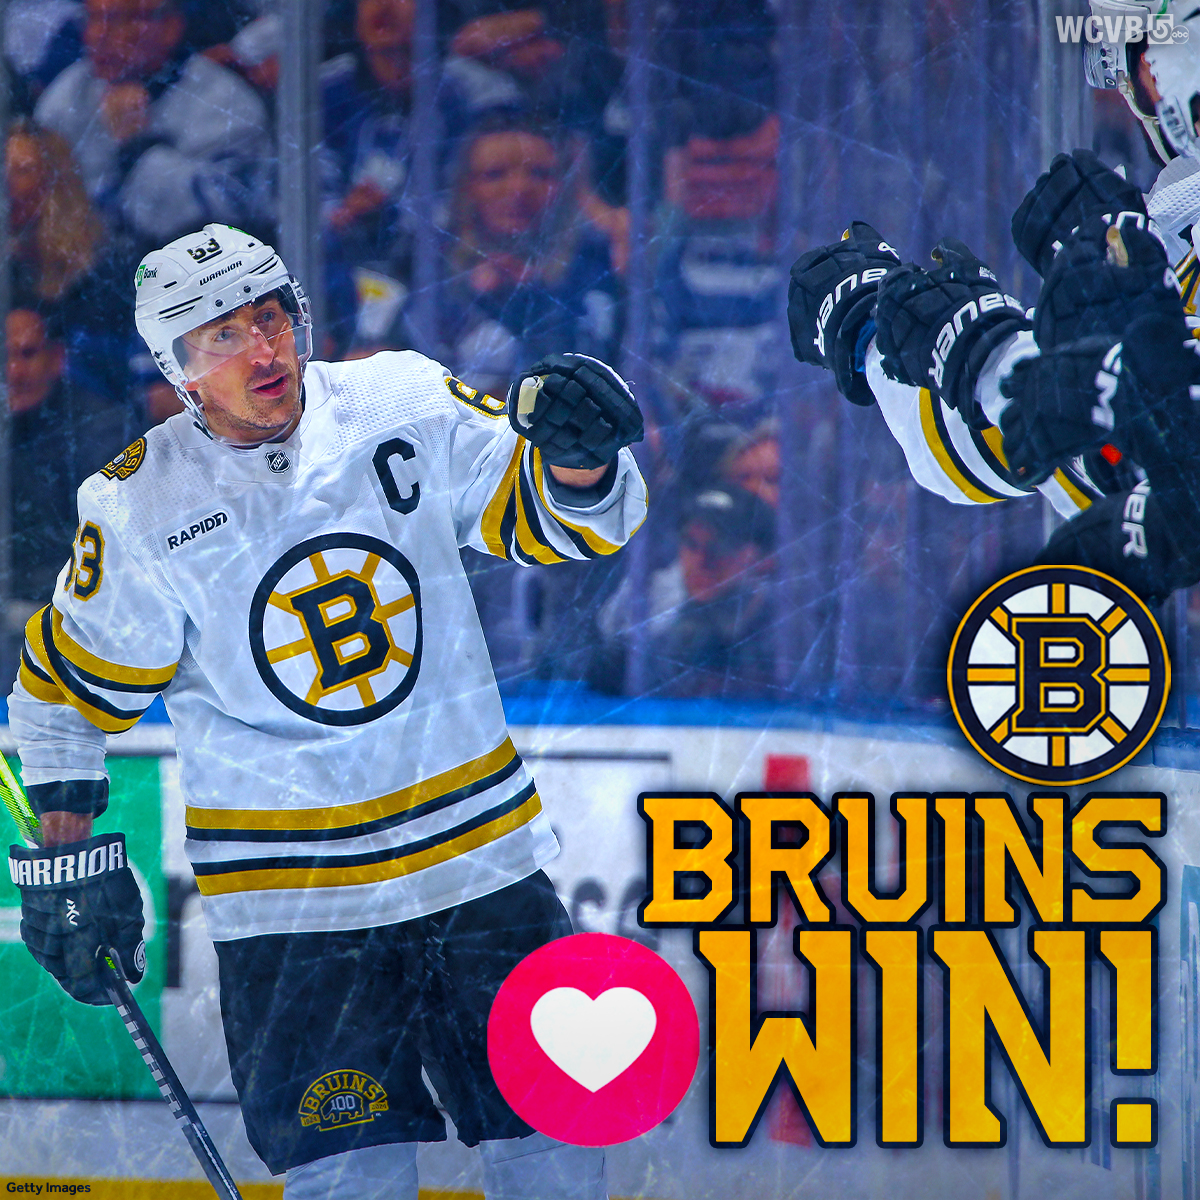 BRUINS WIN!! 🏒❤️🔥 Brad Marchand had a spectacular night in Toronto, and the Bruins head back home with a chance to close out this series on Tuesday night. Share you love for Brad & the B's! 🏒❤️